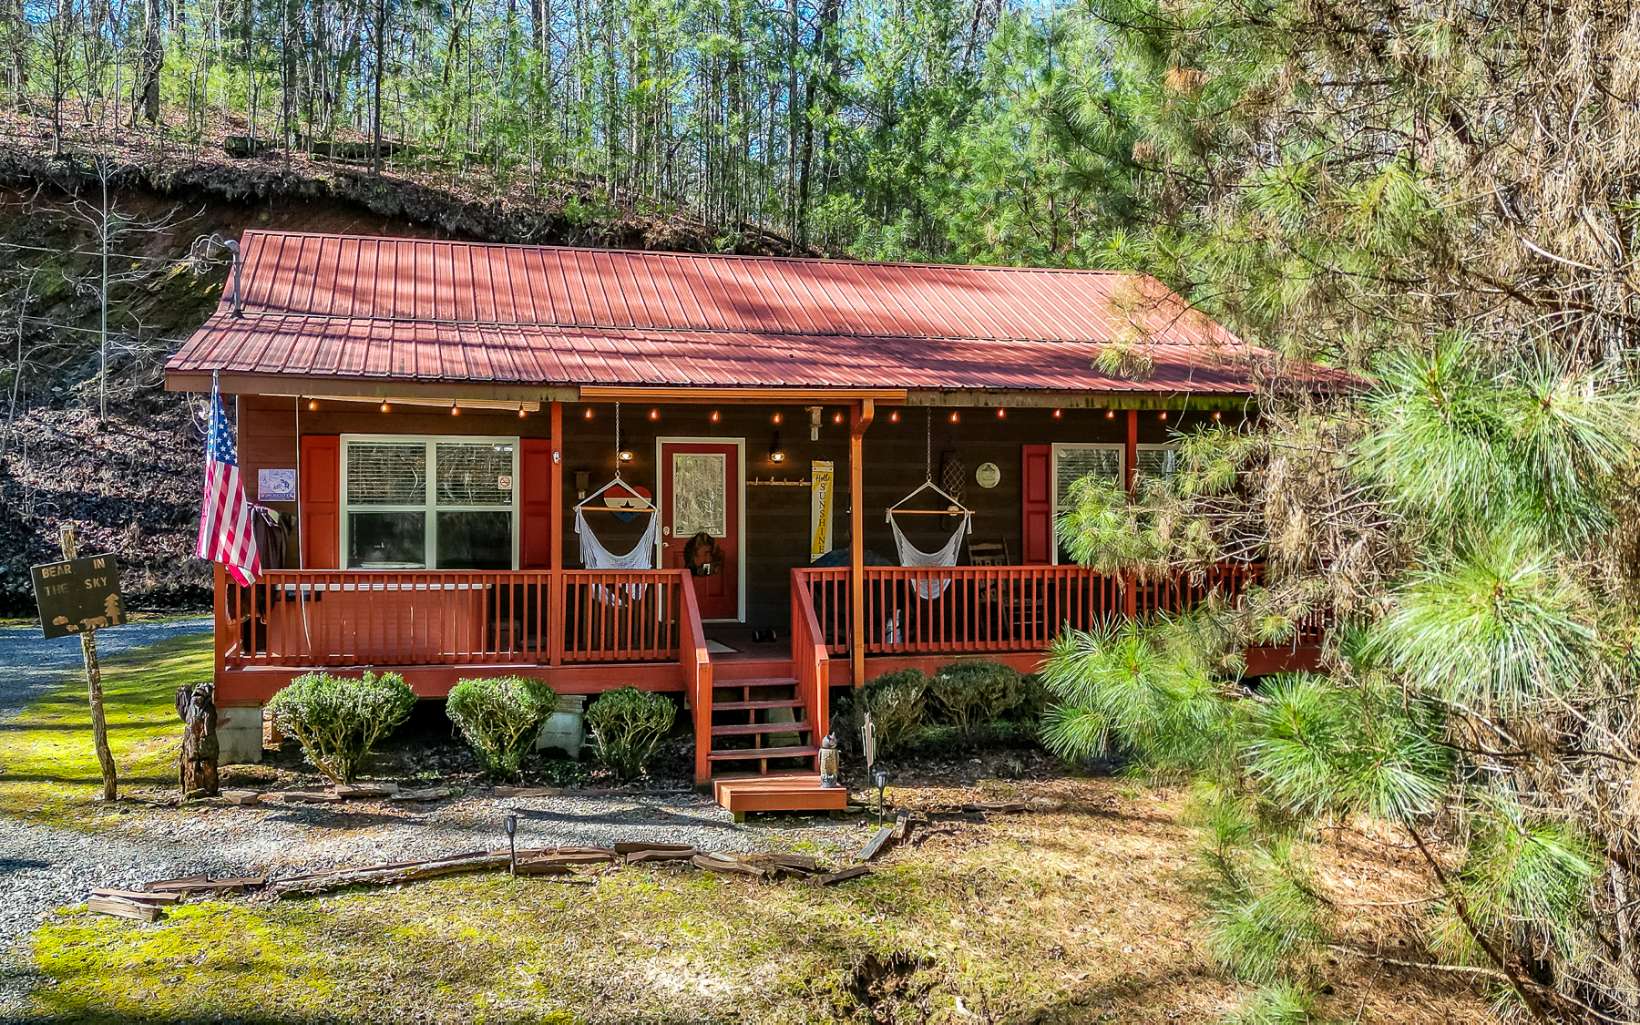 Welcome home to your turn-key cabin in the mountains. This fully furnished beauty has all of the comforts needed for a private escape. Enjoy your time indoors by one of the fireplaces, clear your mind in the jetted tub, or enjoy a meal in the open concept dining area with your friends or family. Head outside for more fun and relaxation on your own property. Bring some warmth to your winter nights watching wildlife in the front yard from the large hot tub under the covered porch. Wrap up the evening around the fire pit in the backyard. All of this without sacrificing modern necessities, such as fiber optic internet, to ensure a stress-free day working from your own cabin in the mountains. Get closer to nature within the gates of the Coosawattee River Resort with catch and release fishing, your pick of various heated pools, fitness and spa centers, 18 hole golf course, tennis, RV camping, game room, event spaces, basketball courts, and more.